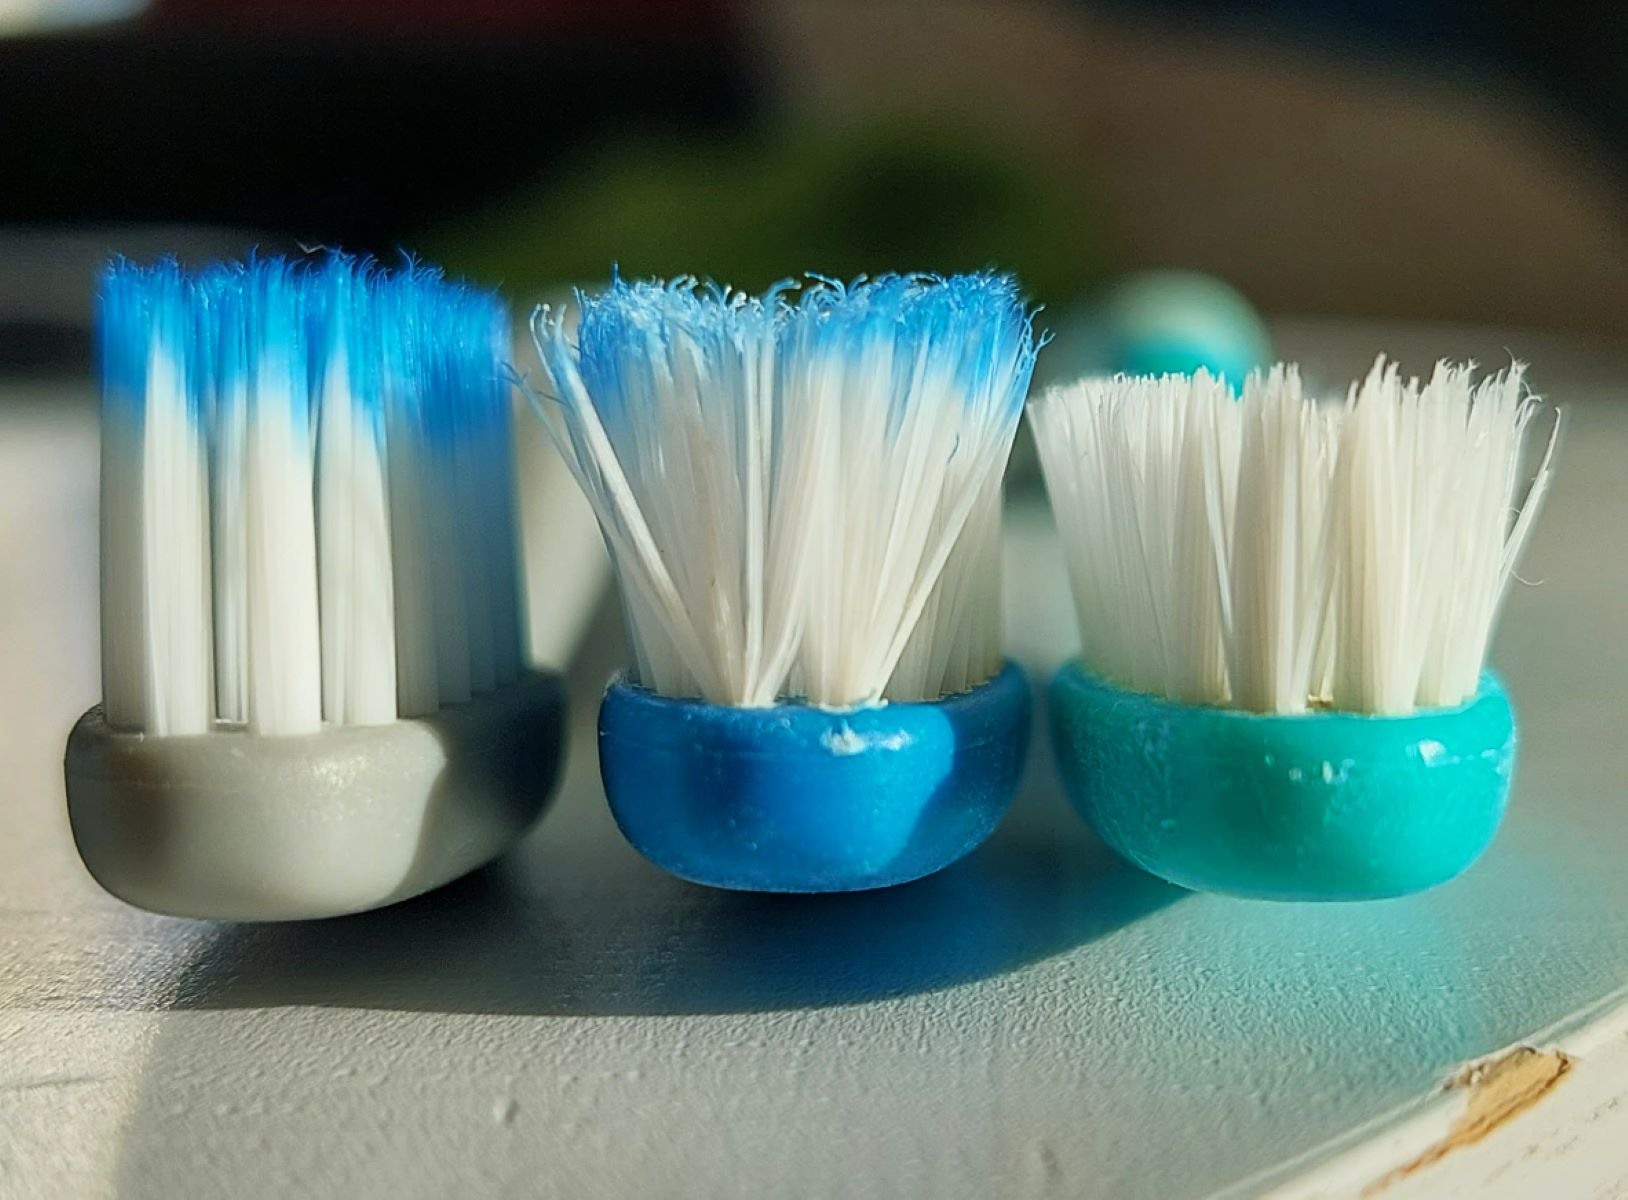 How Many Bristles Are In A Toothbrush